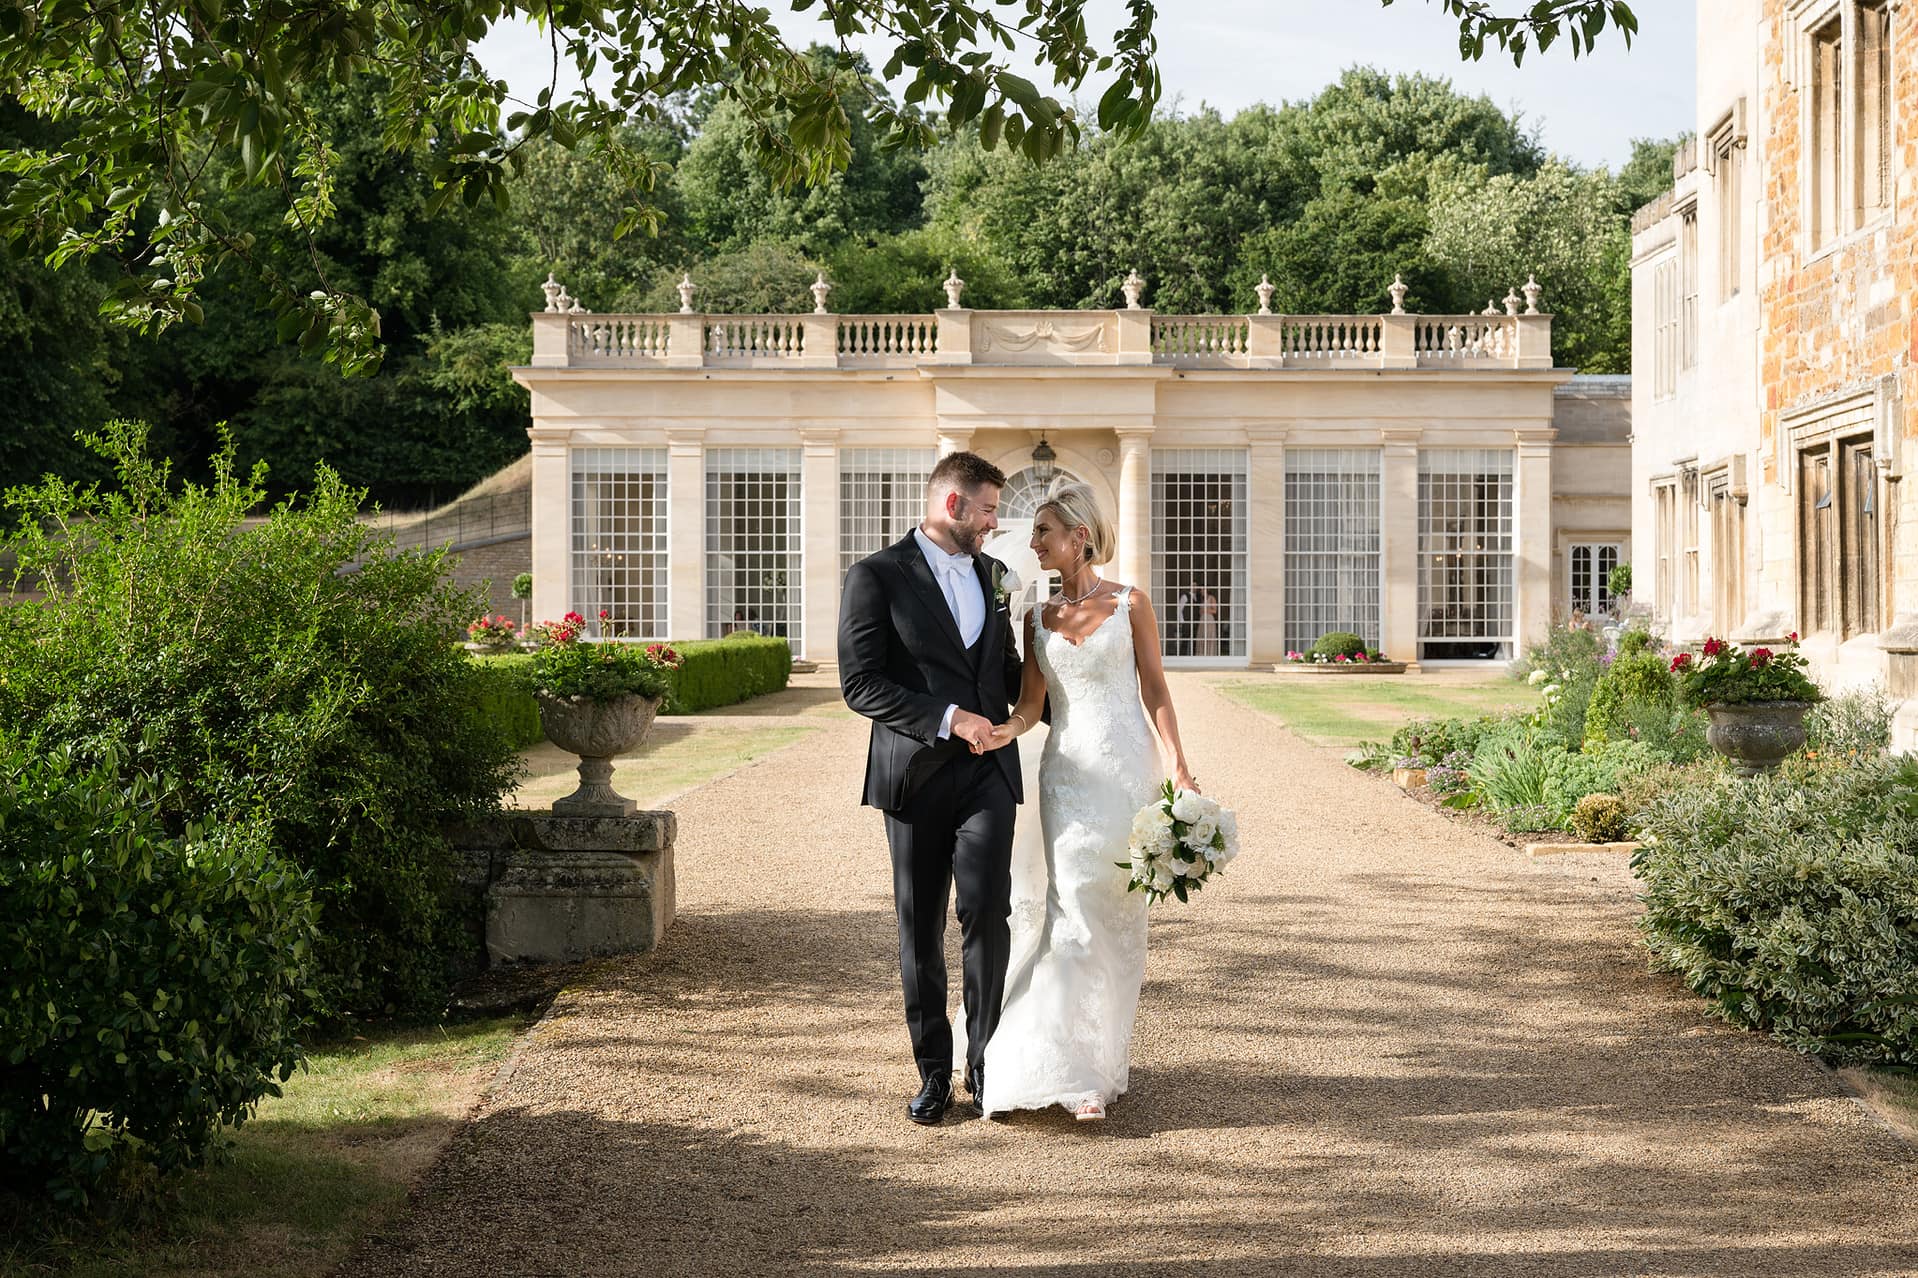 Bride and groom walking in front of an orangery